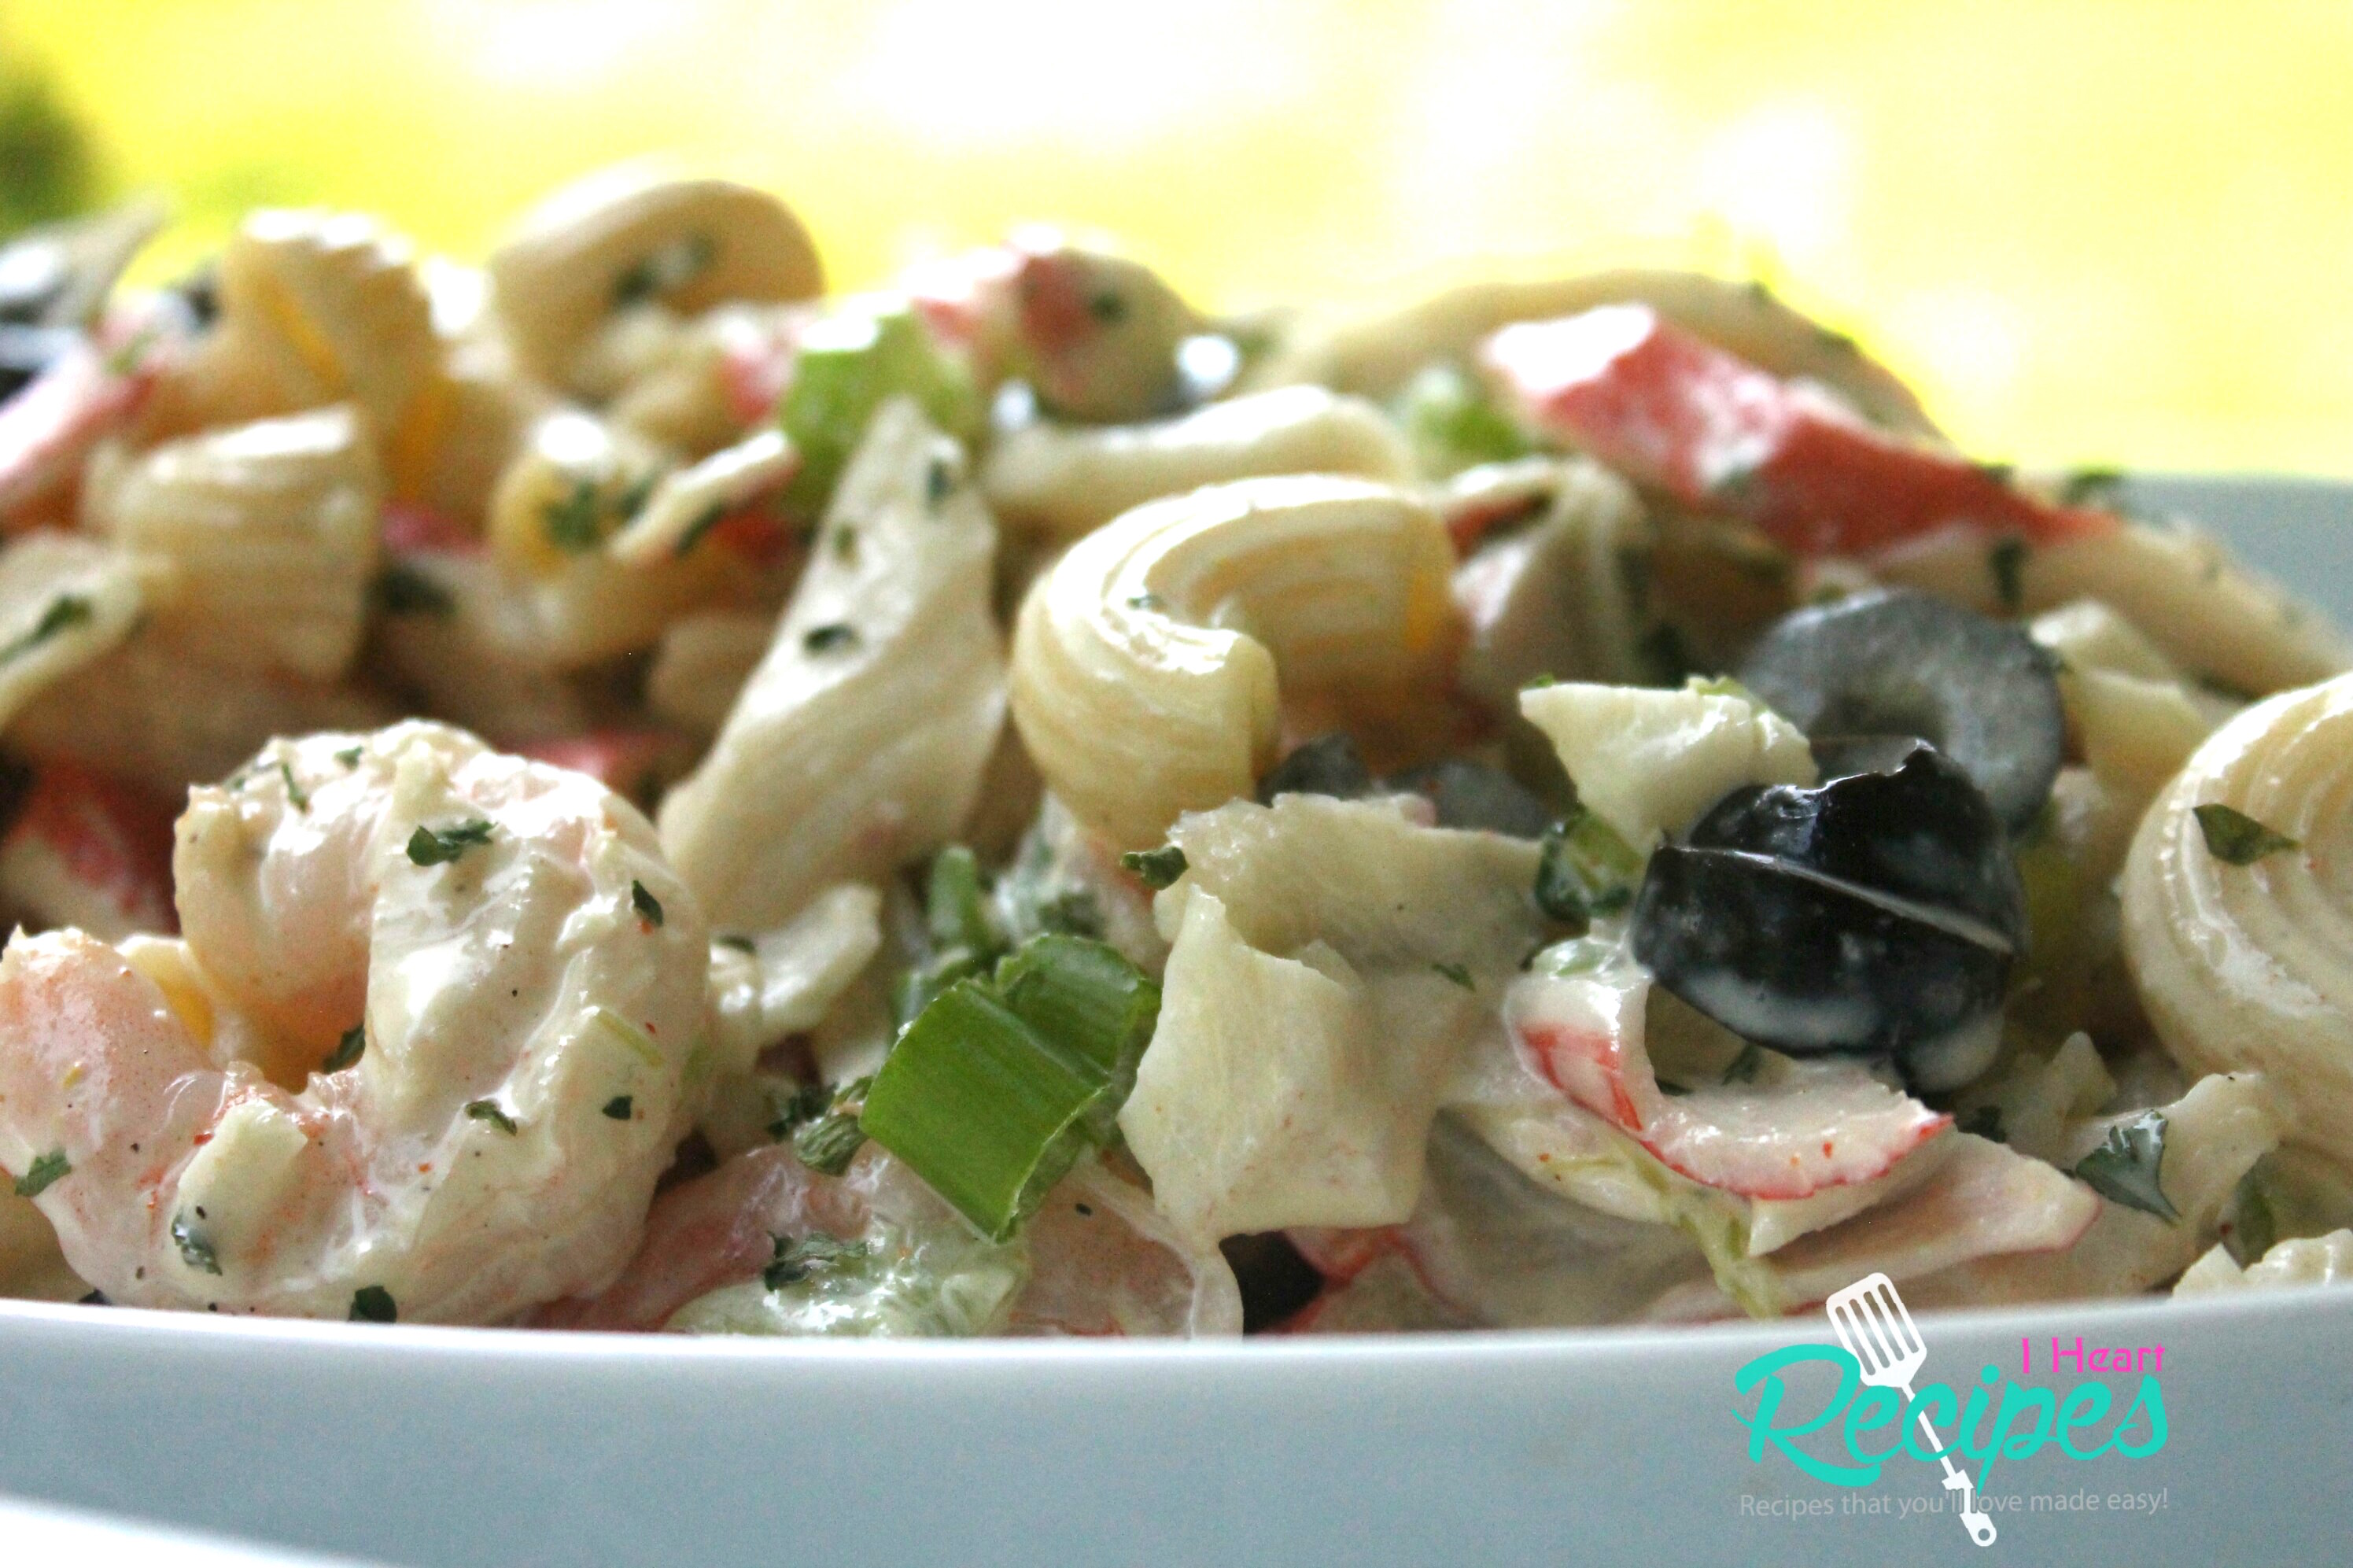 A side-angle view of a large bowl of seafood pasta salad, a creamy mix of crab meat, shrimp, veggies, and seasoning.